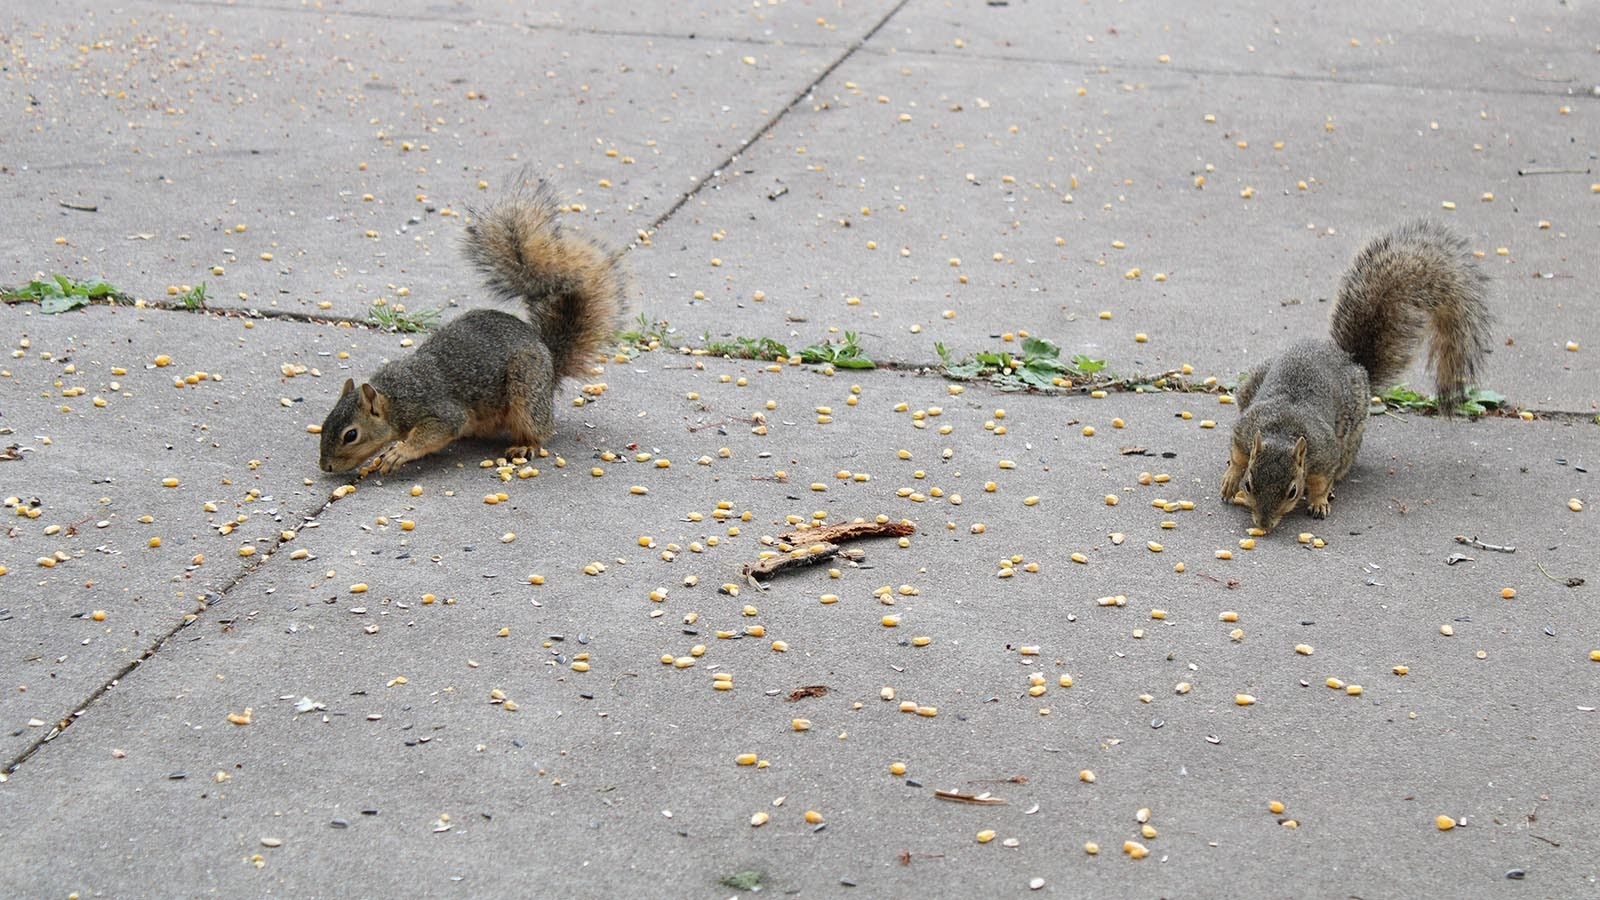 People have left corn for squirrels in Holiday Park in Cheyenne to eat.